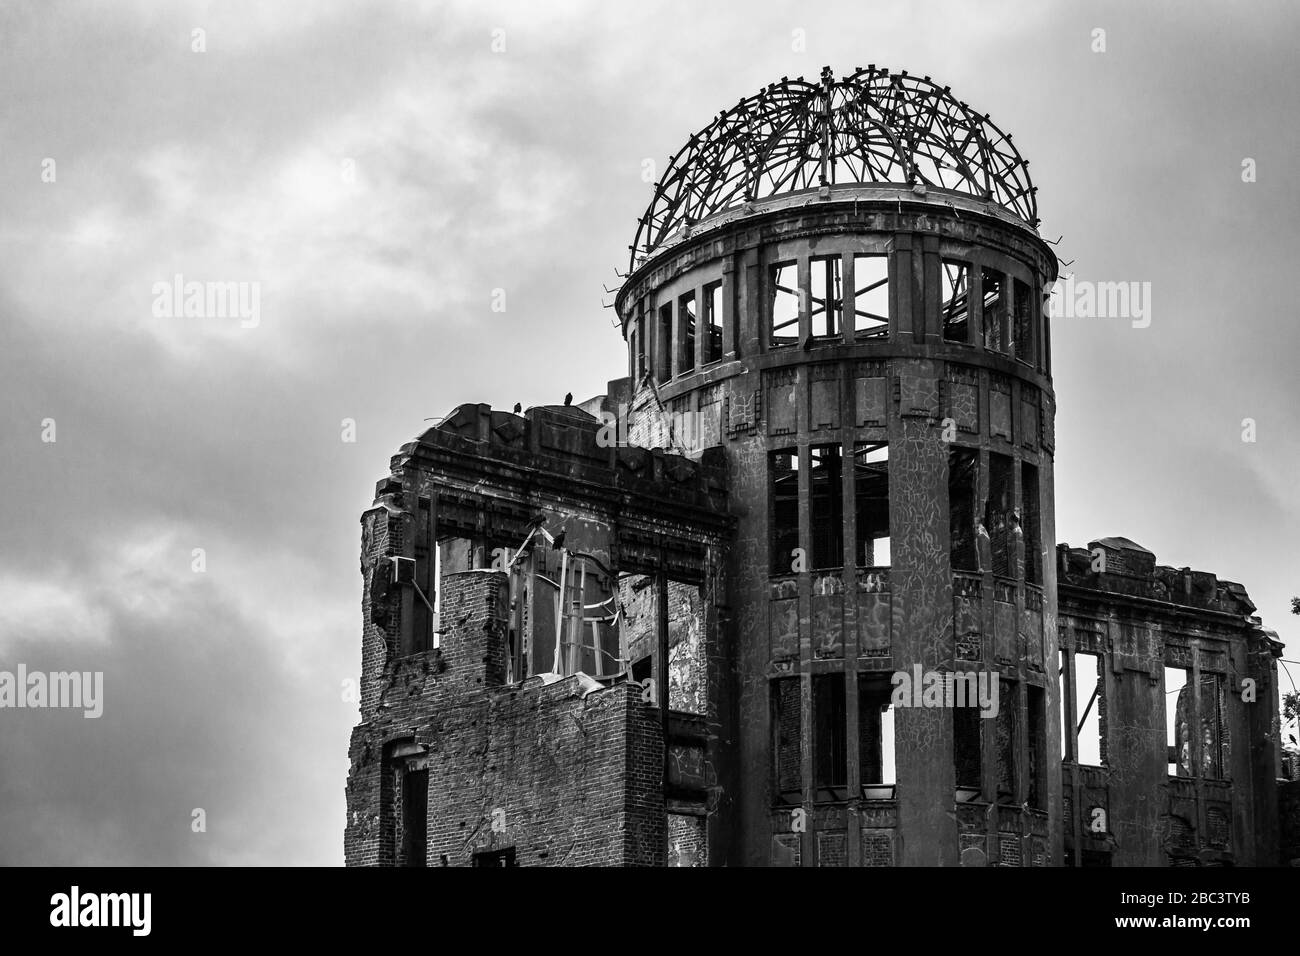 Black and white view of A-Bomb Dome or Genbaku Dome at Hiroshima Peace Memorial Park, UNESCO World Heritage Site, Japan Stock Photo